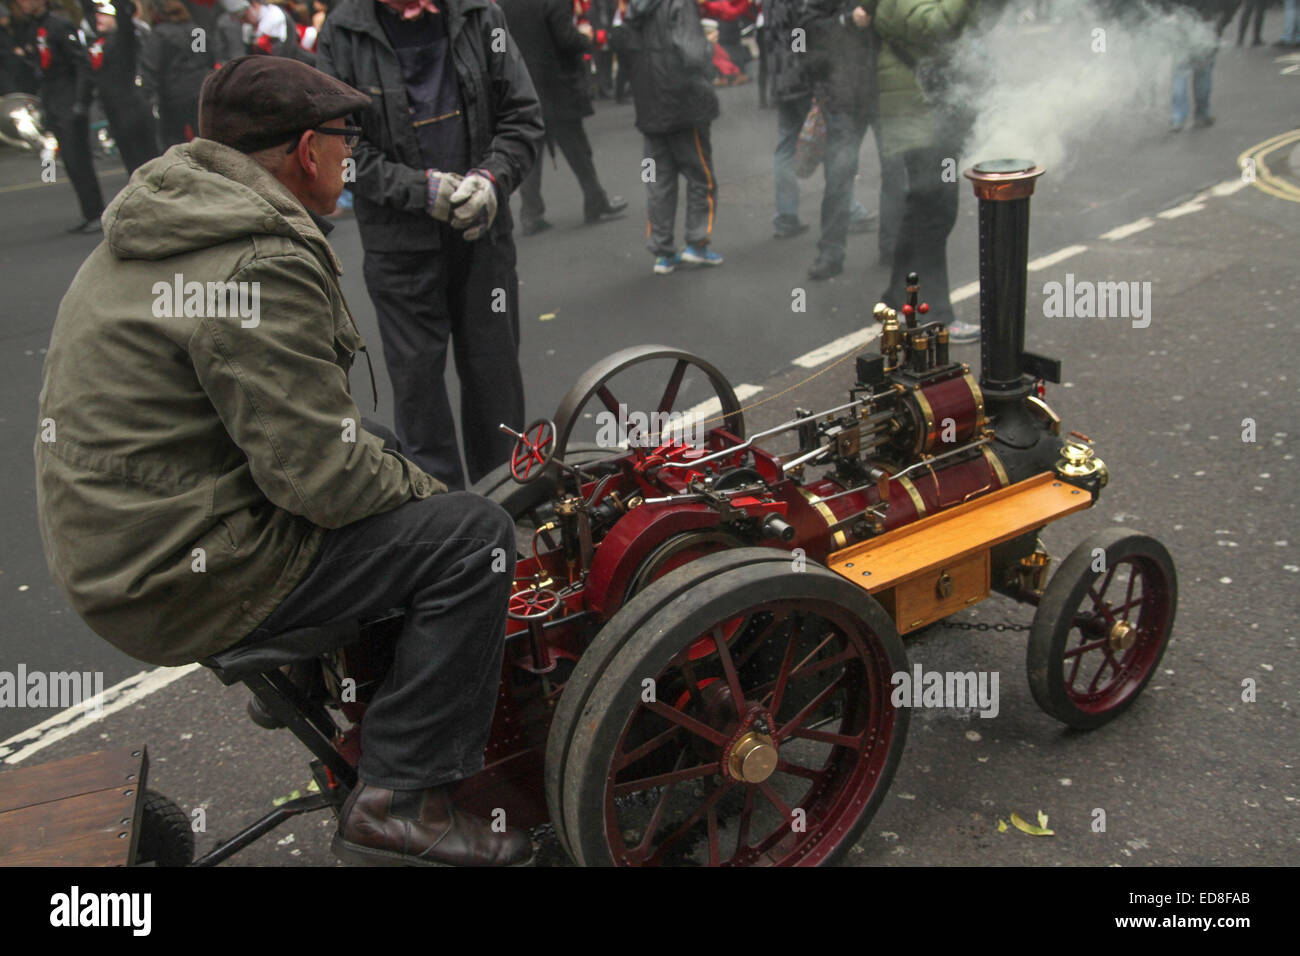 London, UK. 1 January 2015. An operator attends to his mini steam engine. Londoners and tourists turned up in droves for the new years parade. The annual parade goes through Piccadilly, Regents street, Pall Mall and Whitehall a 2 mile route. Photo: David Mbiyu/ Alamy Live News Stock Photo